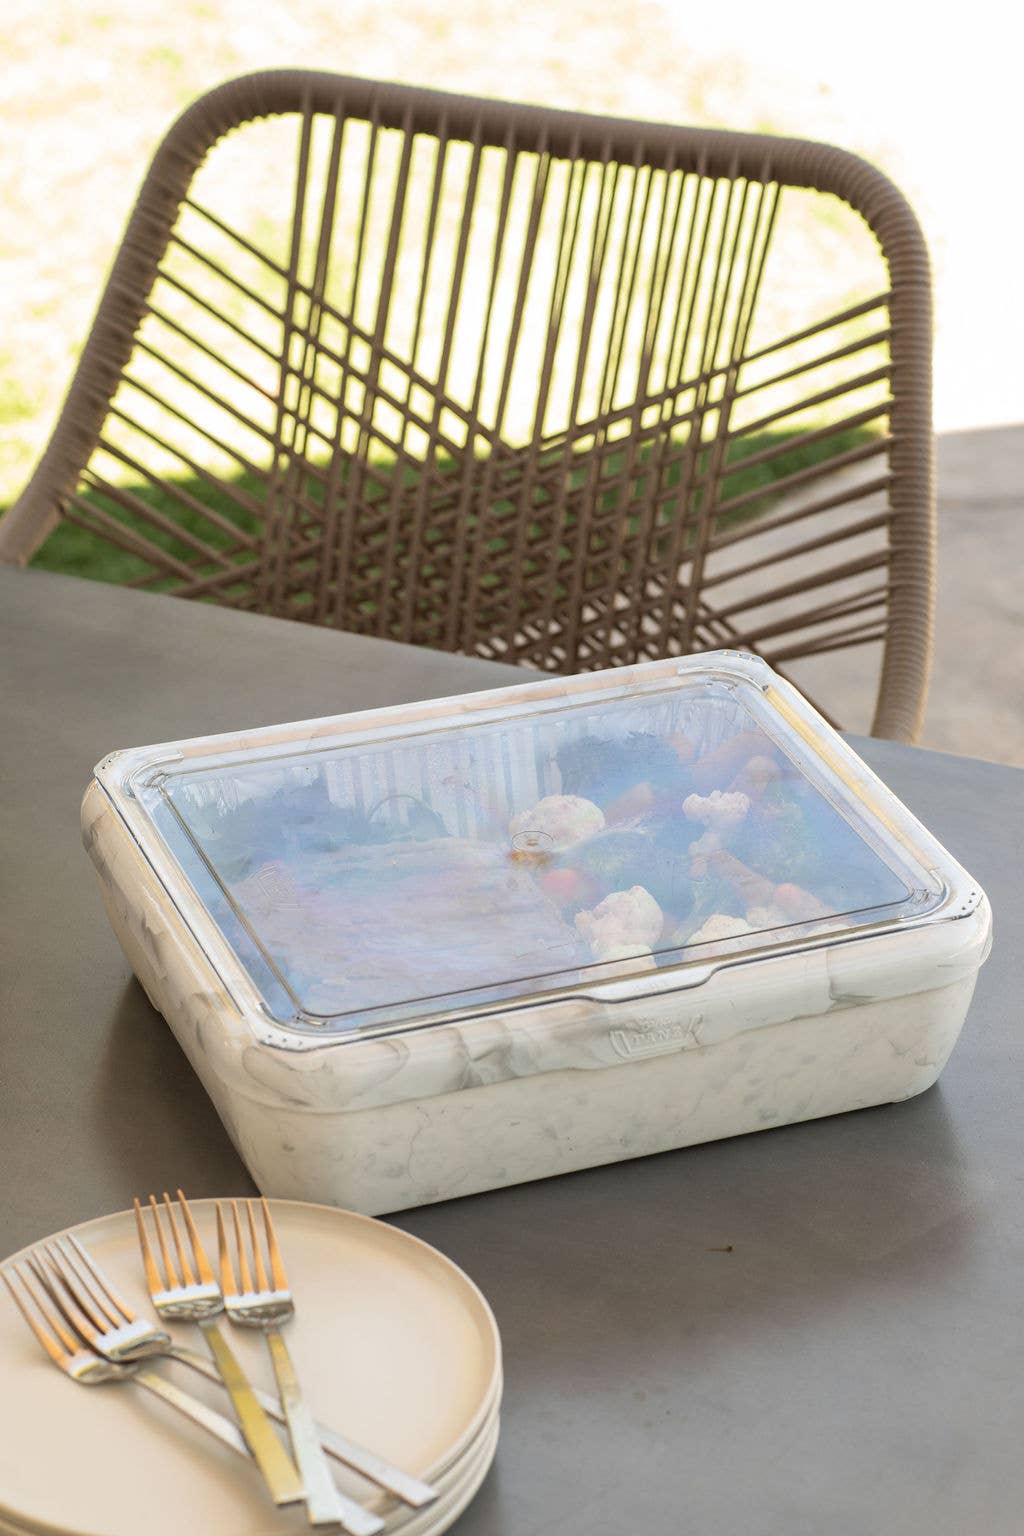 Fancy Panz® Premium White/Grey Marble Includes Hot/Cold Gel Pack - The Preppy Bunny